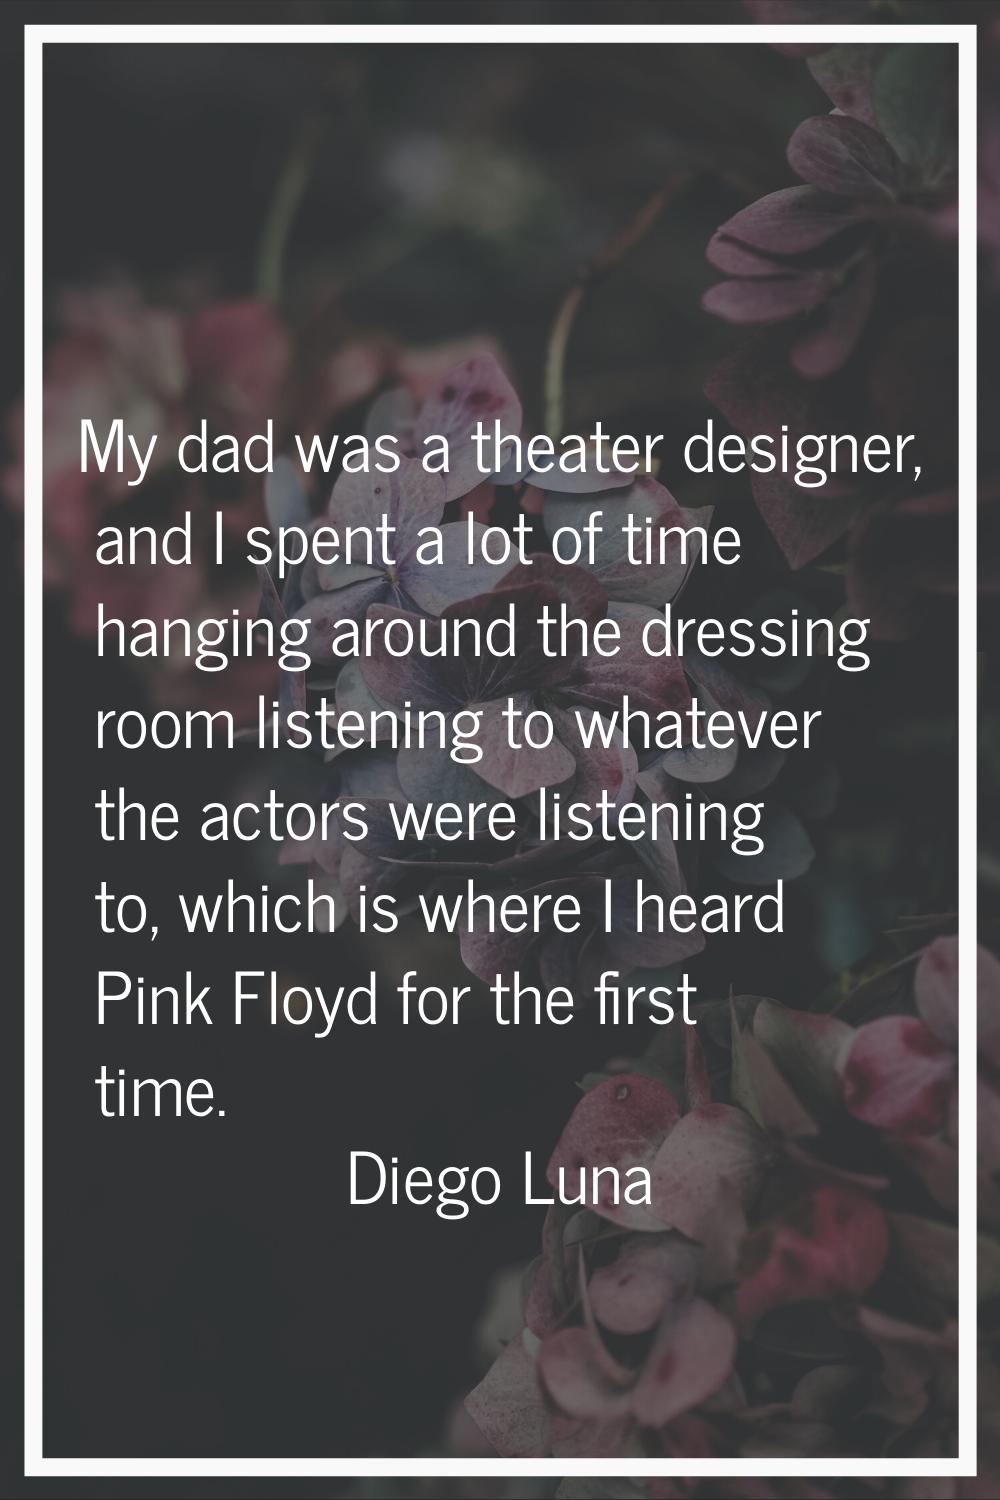 My dad was a theater designer, and I spent a lot of time hanging around the dressing room listening